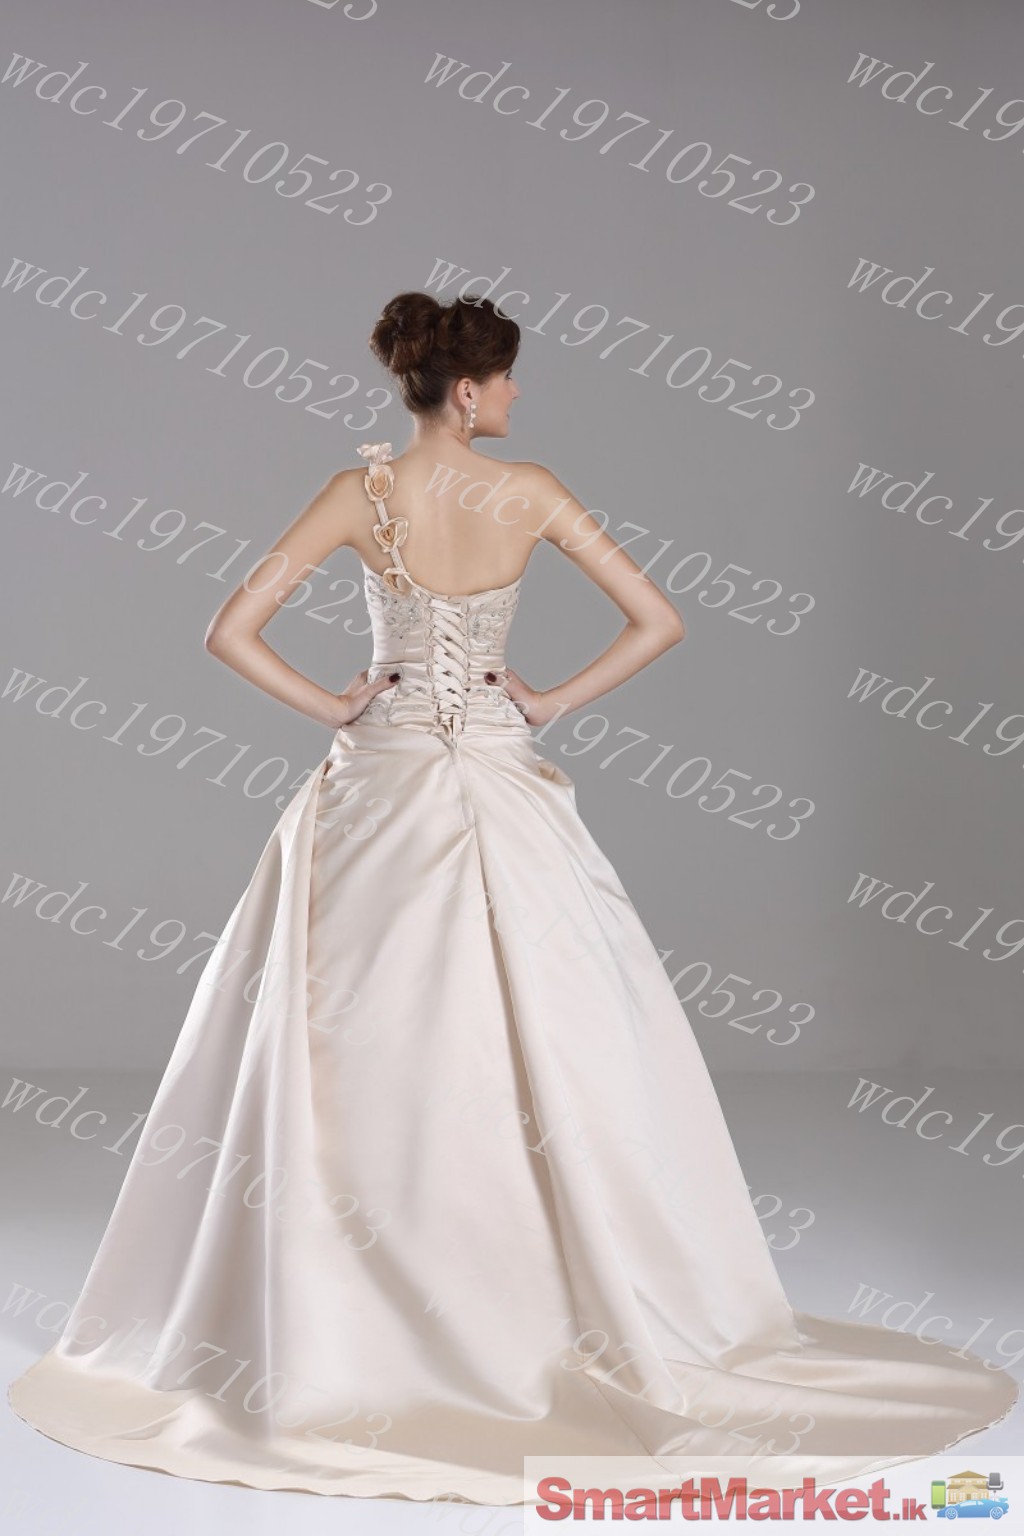 Brand new Cream color bridal gown